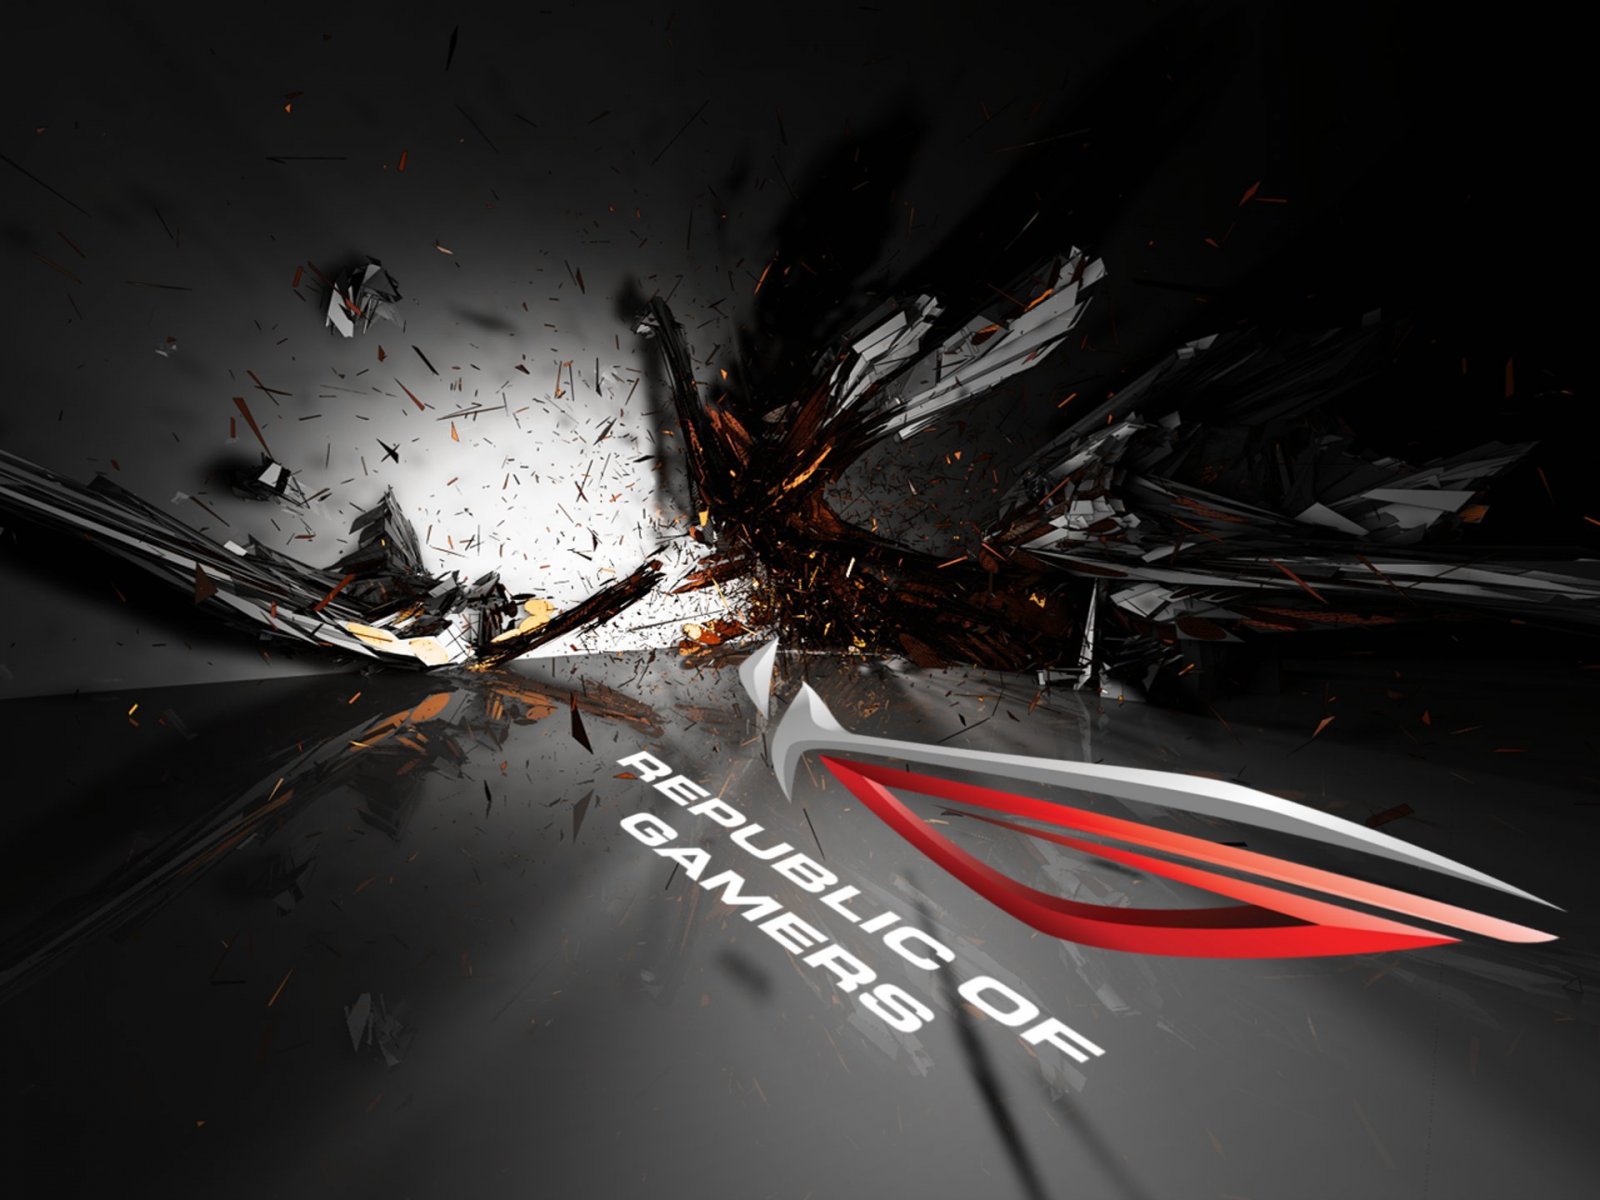 asus rog, technology, republic of gamers